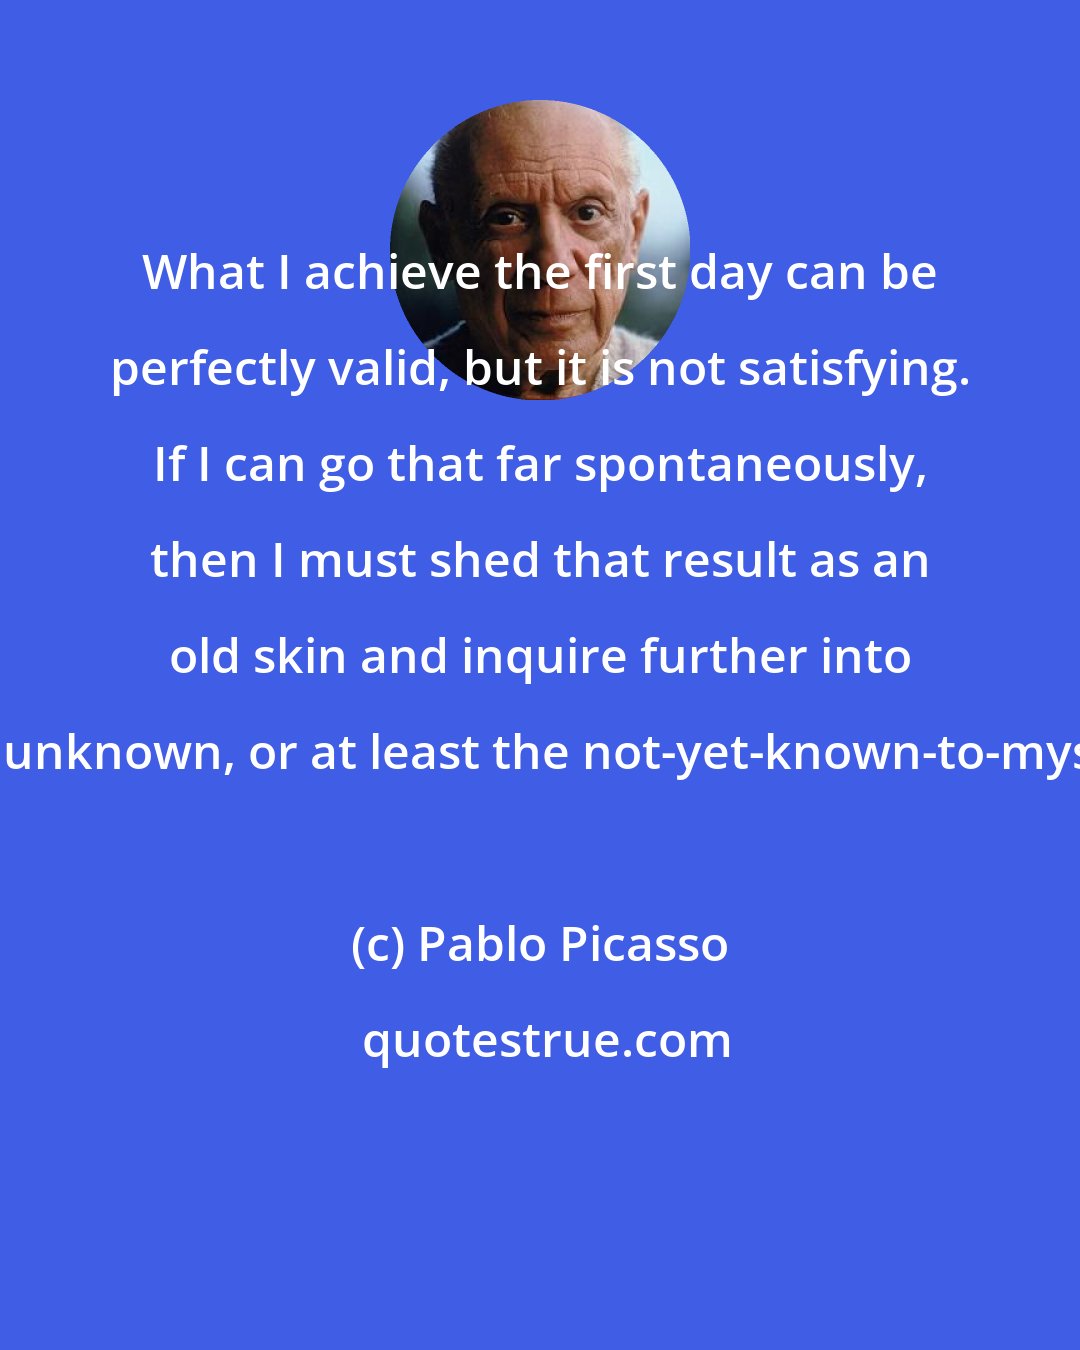 Pablo Picasso: What I achieve the first day can be perfectly valid, but it is not satisfying. If I can go that far spontaneously, then I must shed that result as an old skin and inquire further into the unknown, or at least the not-yet-known-to-myself.